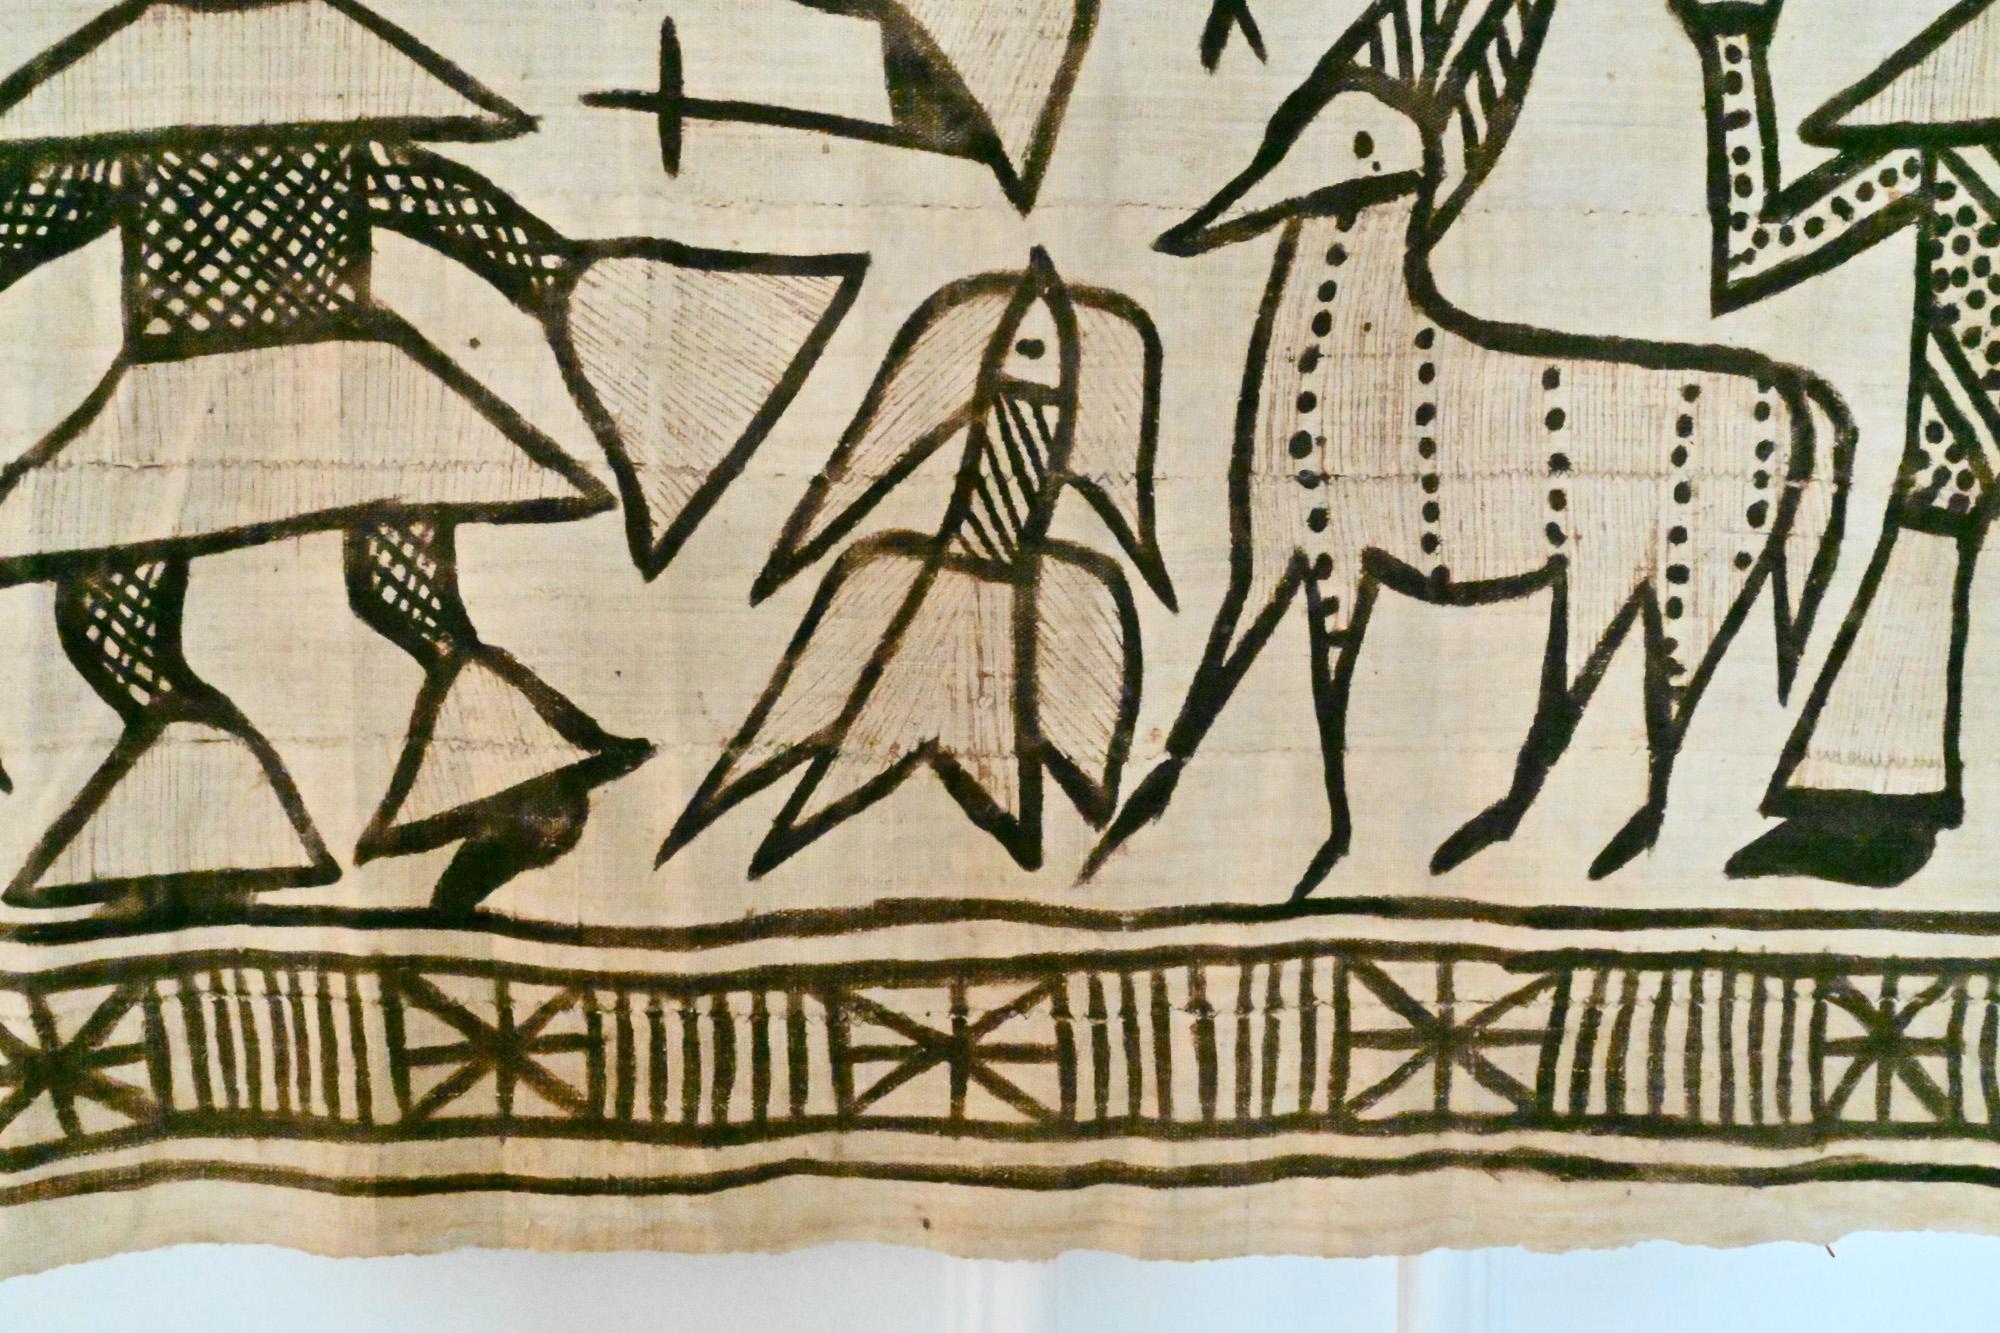 Large pictorial Korhogo cloth, produced by the Senufo people of the Ivory Coast, West Africa. named after the local village (Korhogo) where these types of cloths first originated.

Legend has it that #pablopicasso traveled to the Ivory Coast in the